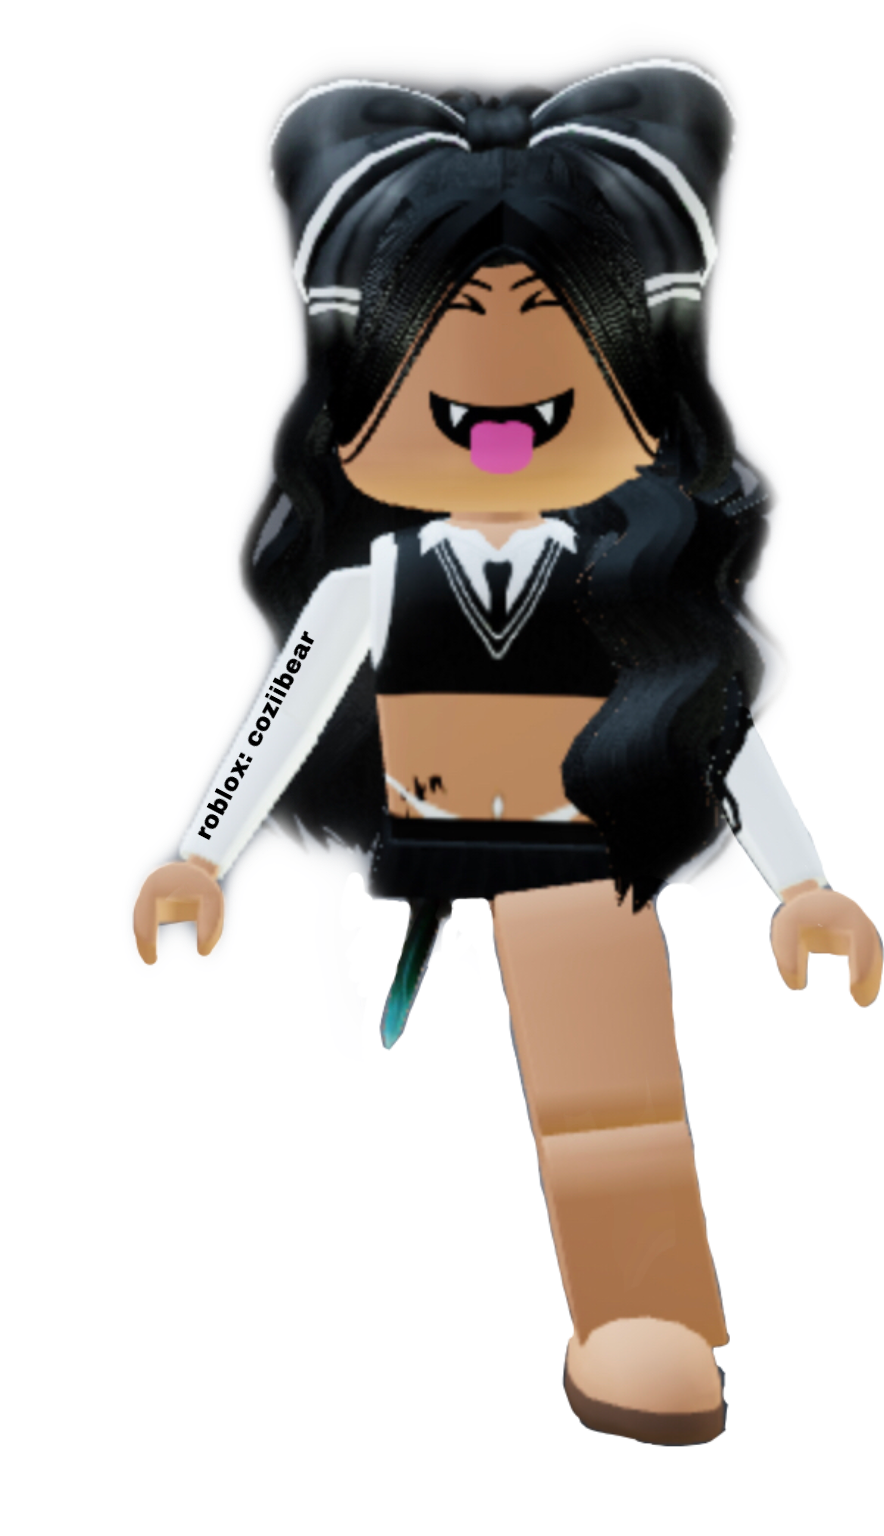 The Most Edited Cnp Picsart - rich roblox character slender